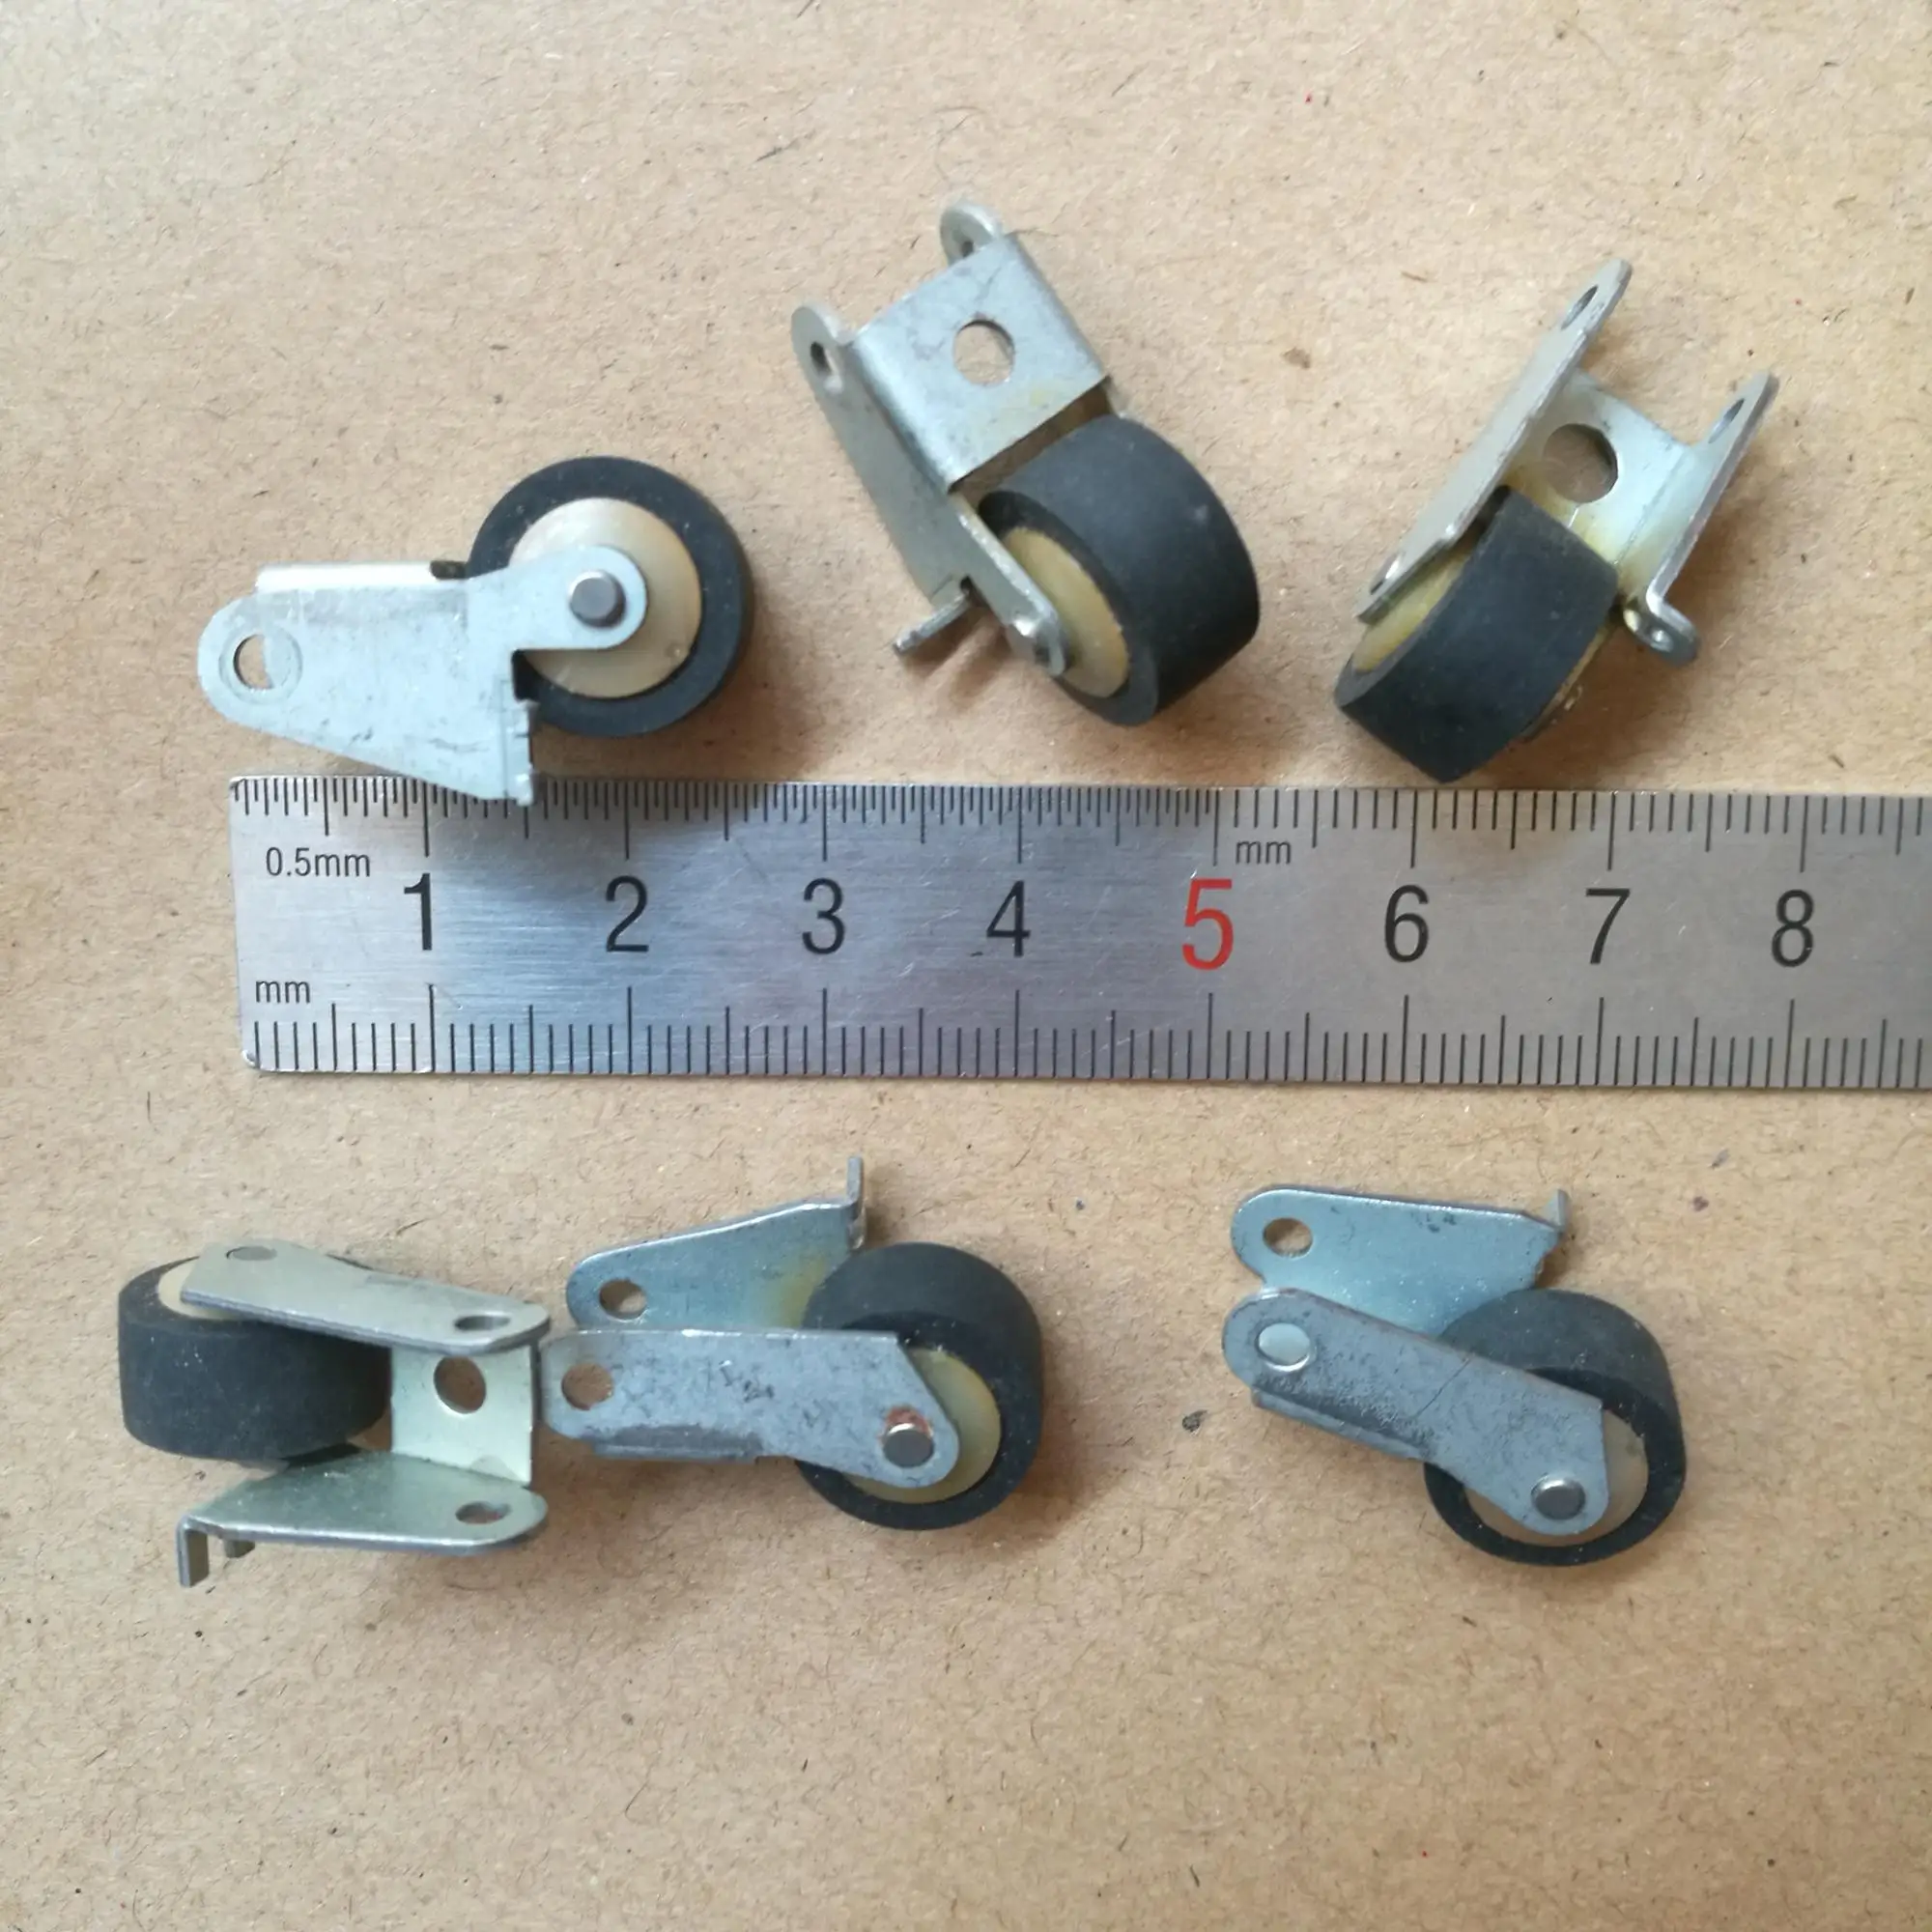 10mm pressure pinch rollers with mounting step